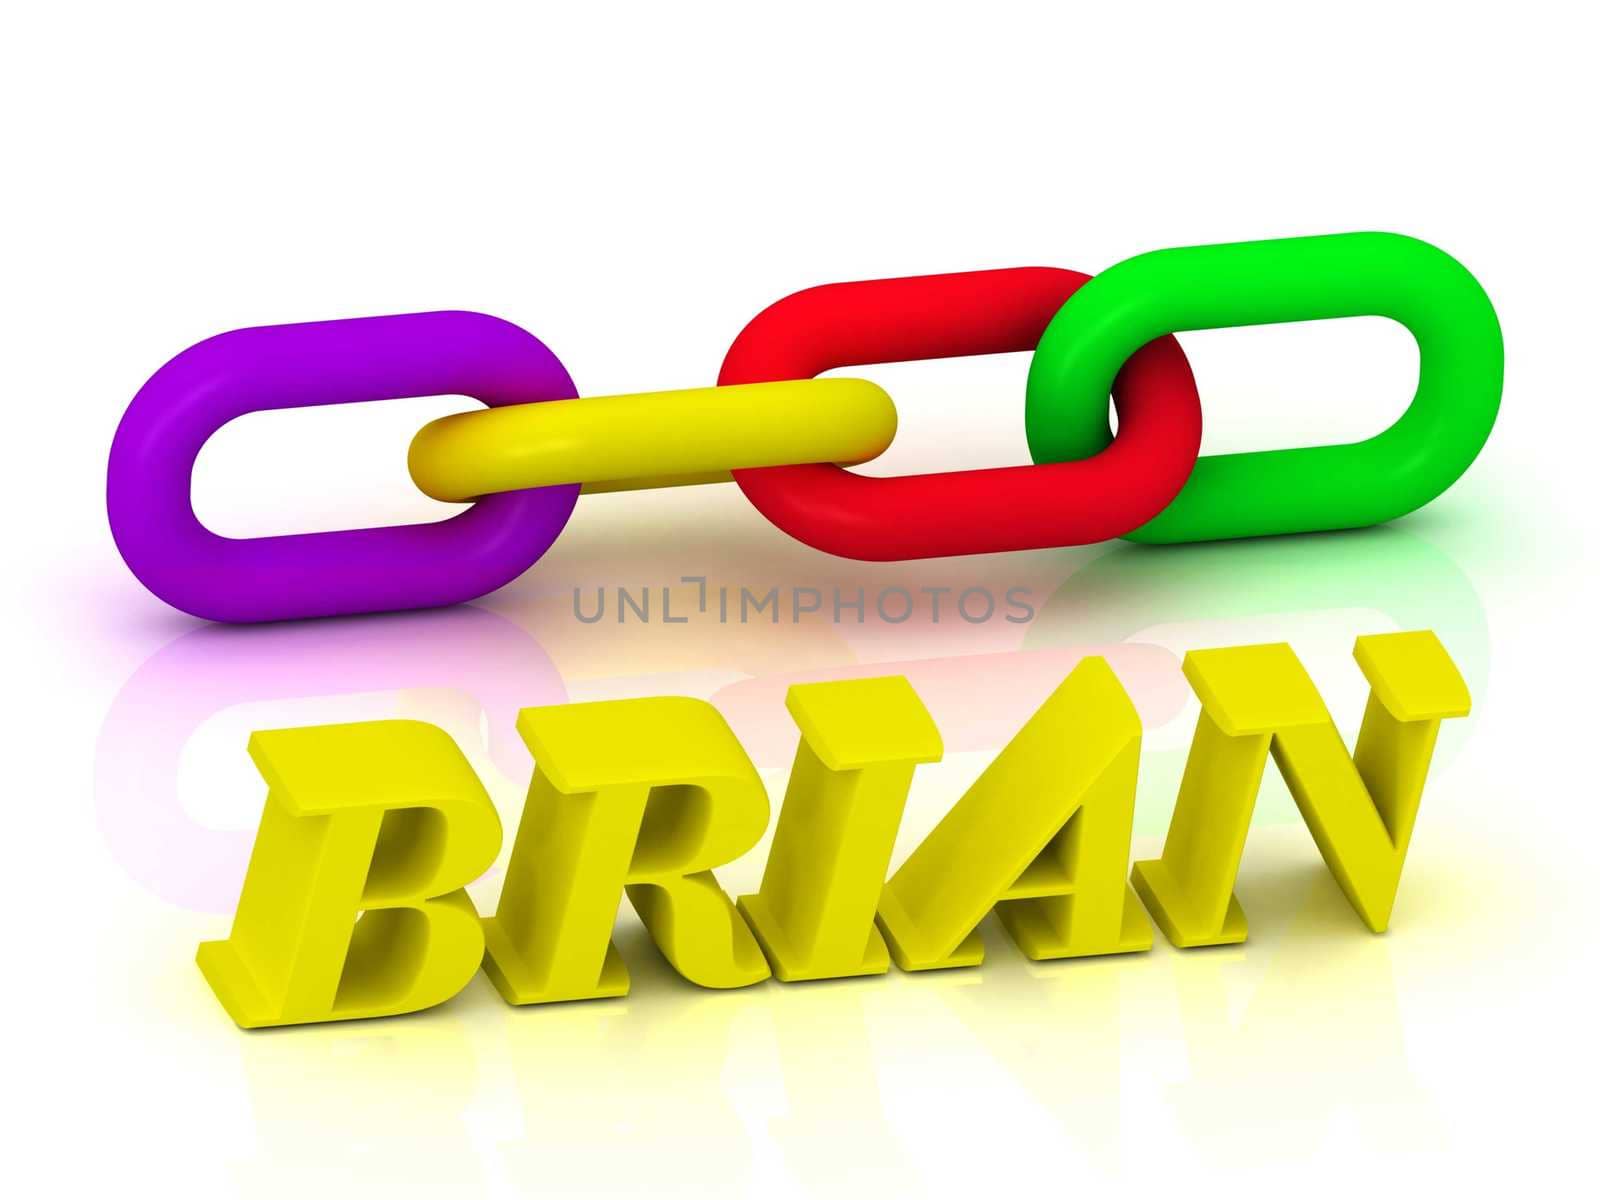 BRIAN- Name and Family of bright yellow letters and chain of green, yellow, red section on white background